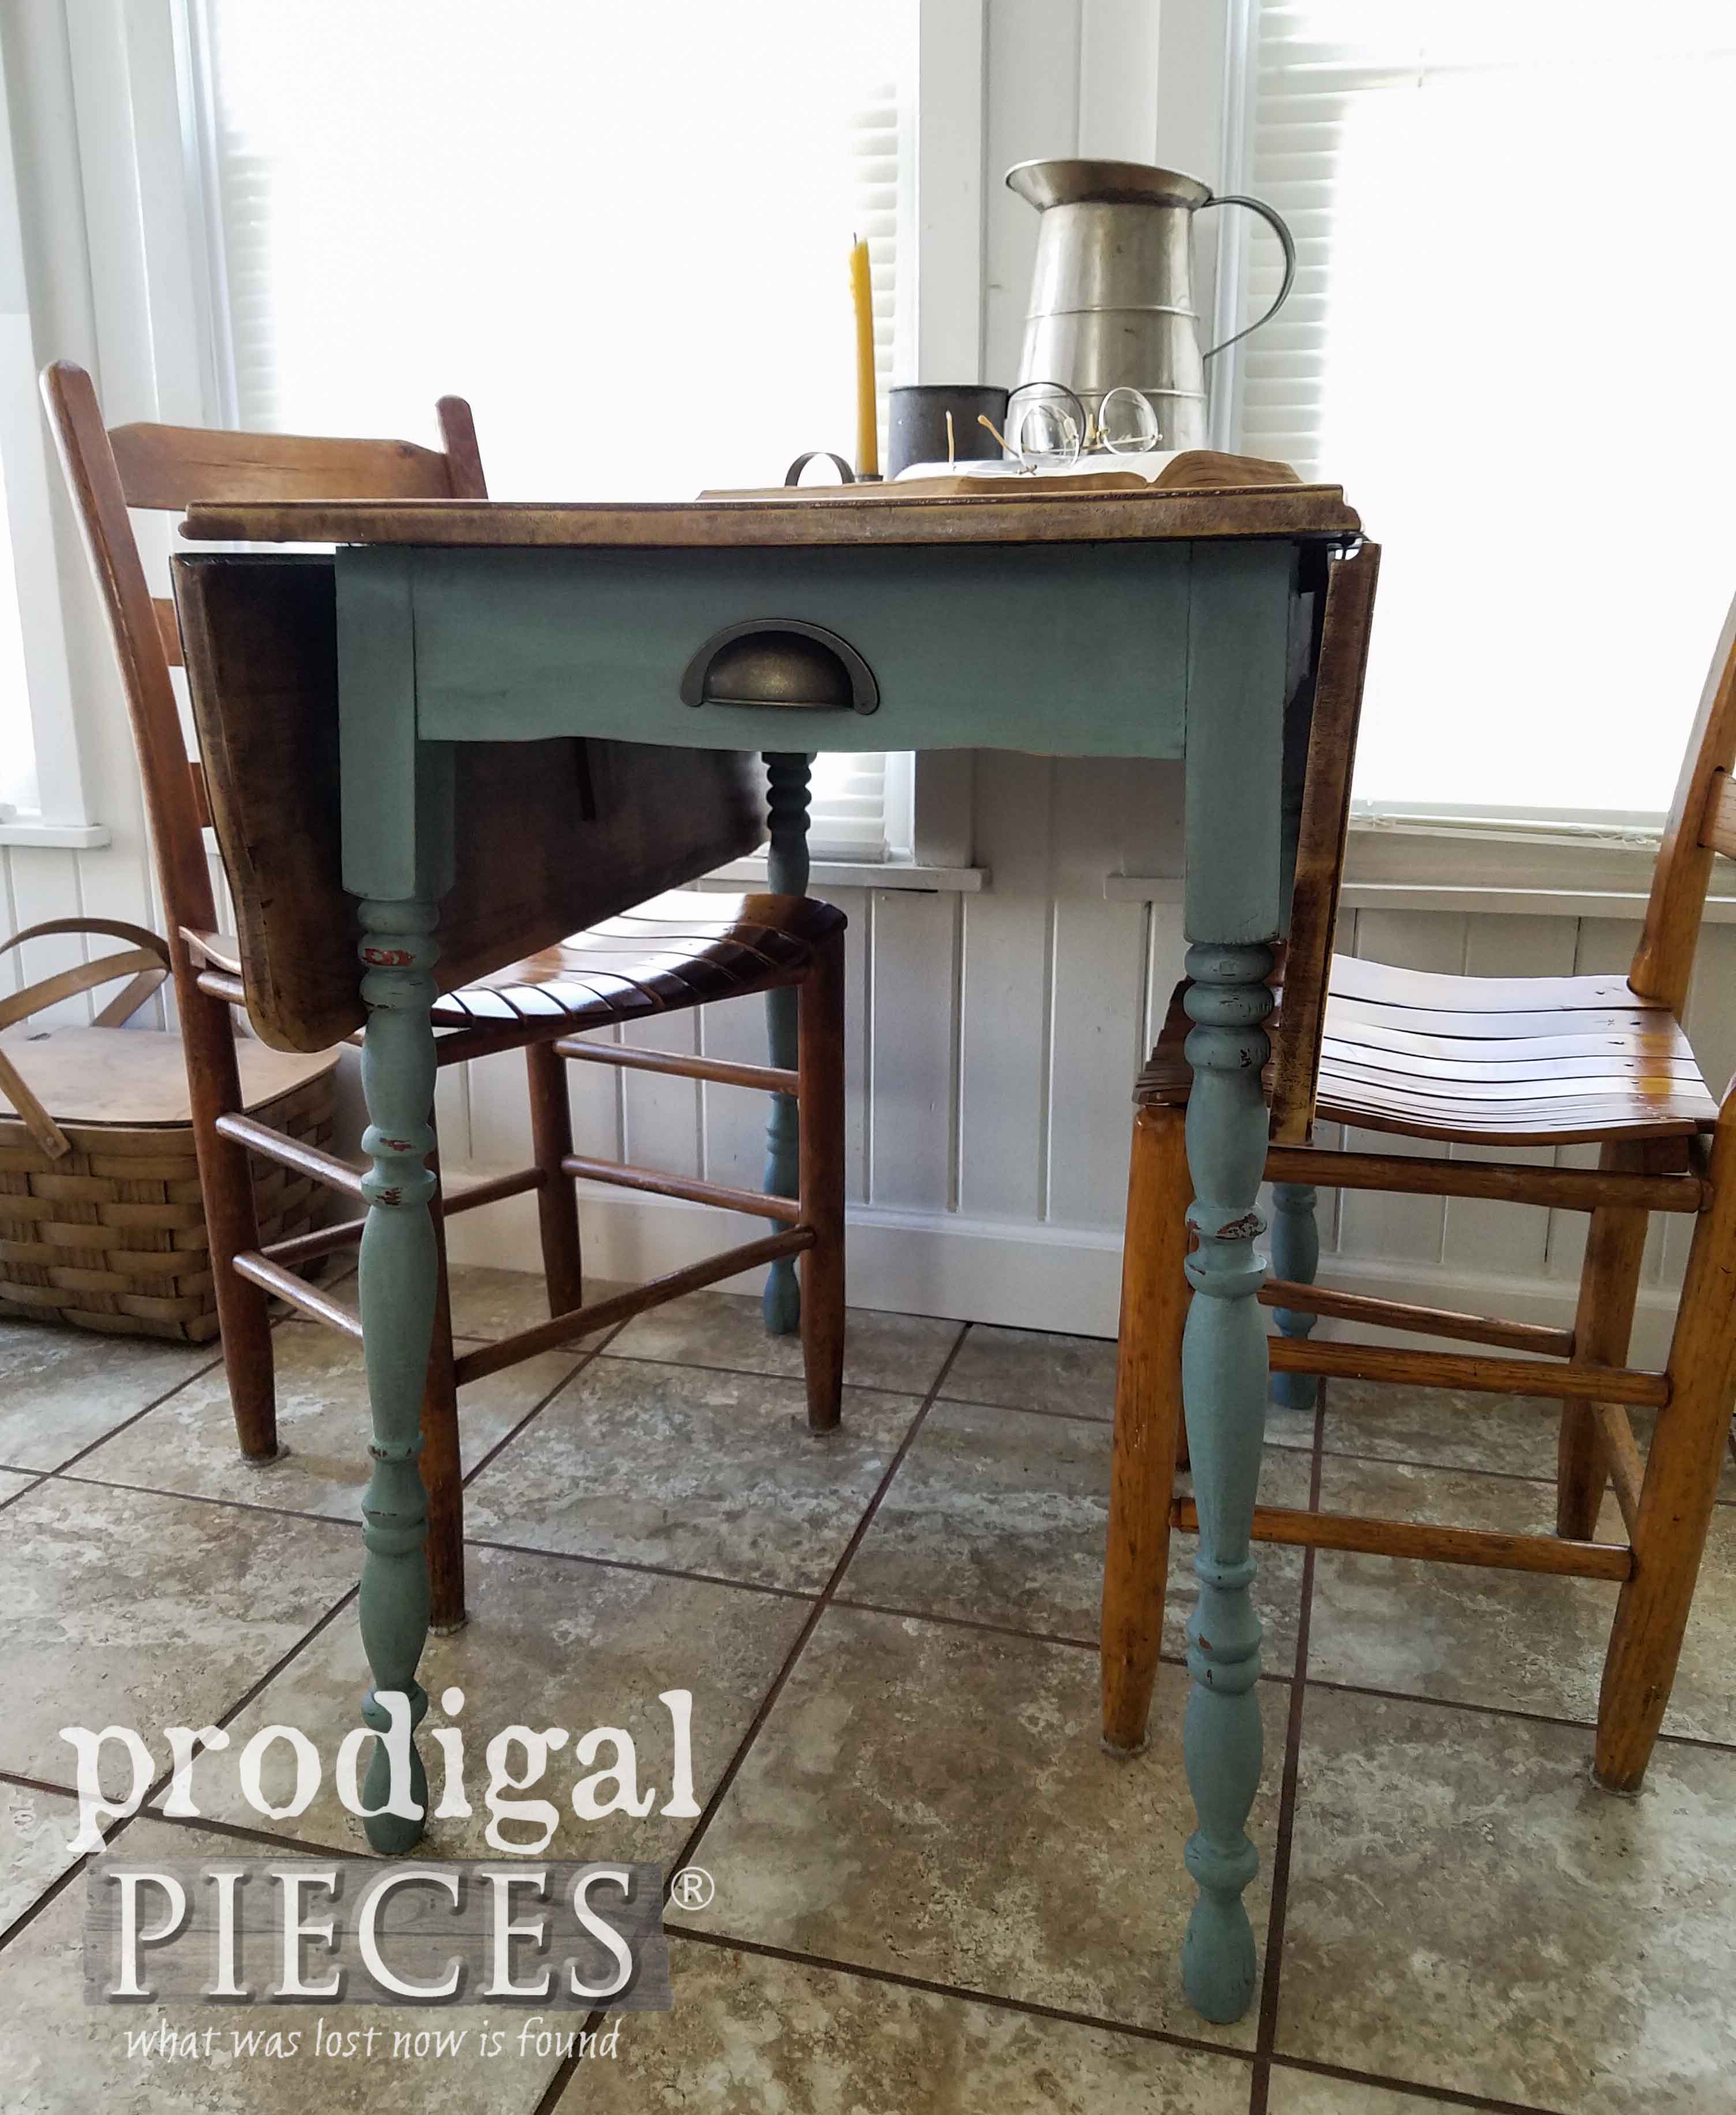 Antique Drop-Leaf Table given new life by Larissa of Prodigal Pieces | prodigalpieces.com